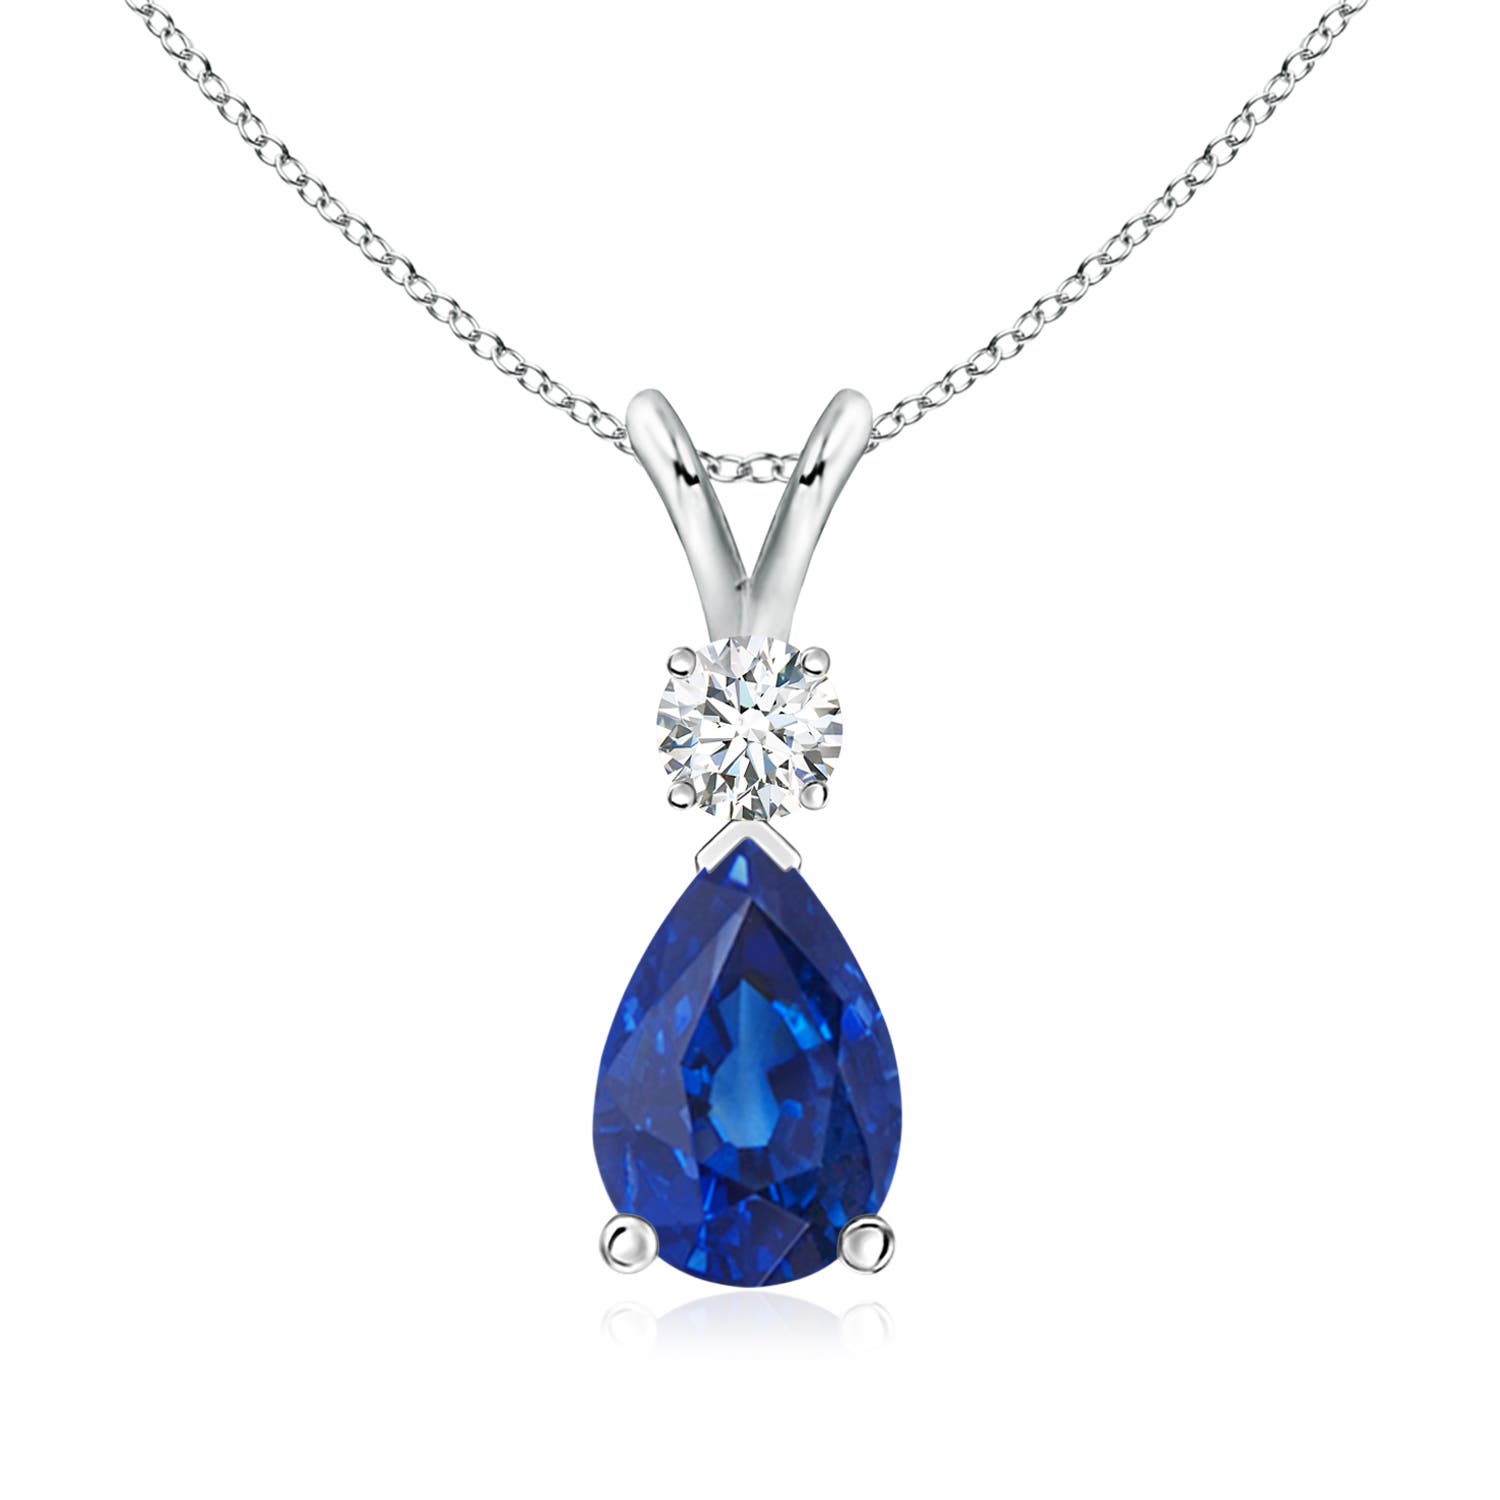 AAA- Blue Sapphire / 1.68 CT / 14 KT White Gold